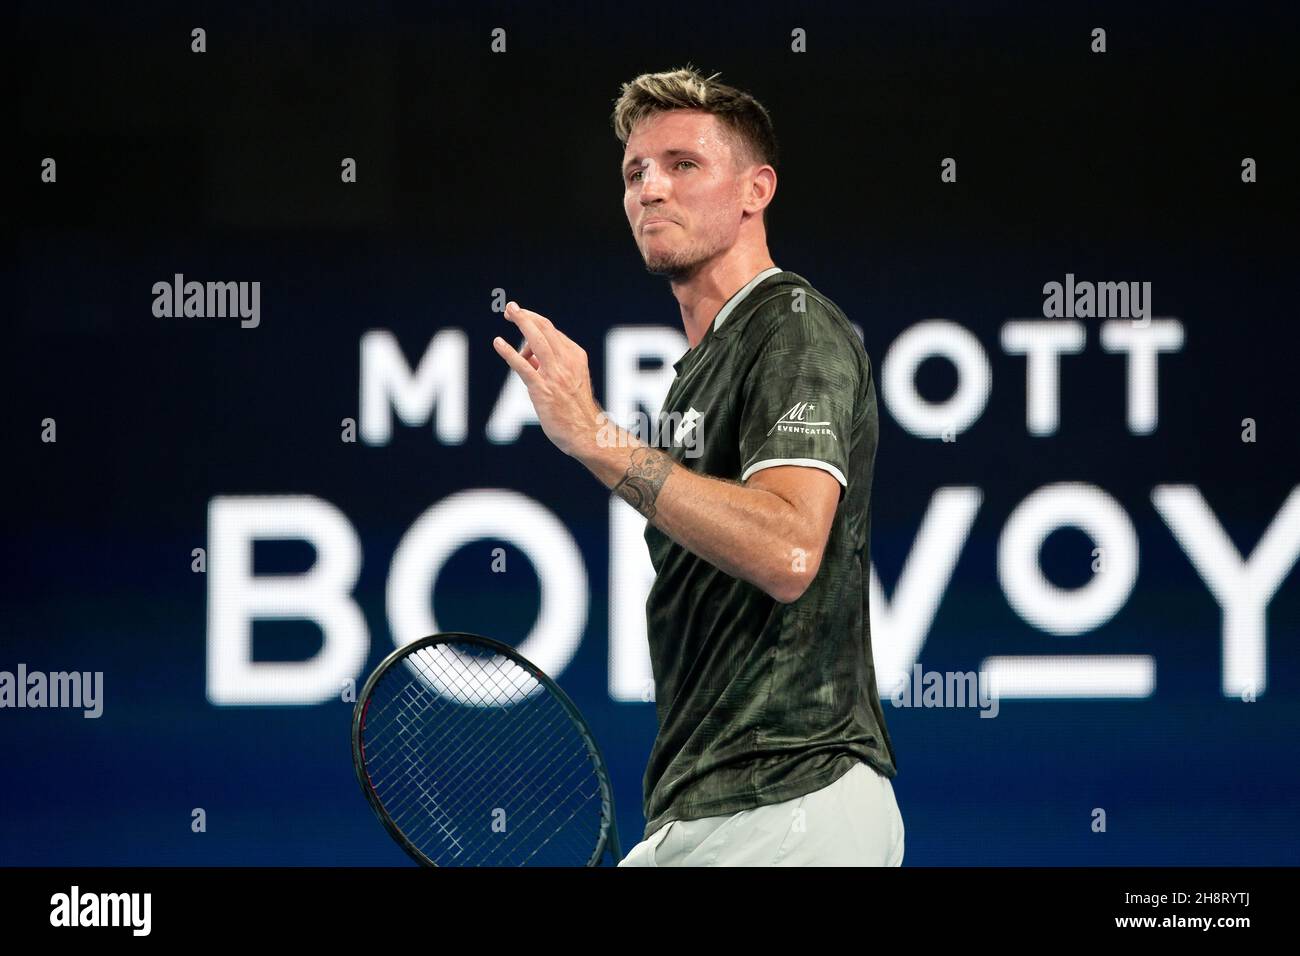 SYDNEY, AUSTRALIA - JANUARY 04: Dennis Novak of Austria during day two of the Group singles match at the 2020 ATP Cup Tennis at Ken Rosewall Arena on January 04, 2020 in Sydney, Australia. Credit: Speed Media/Alamy Live News Stock Photo